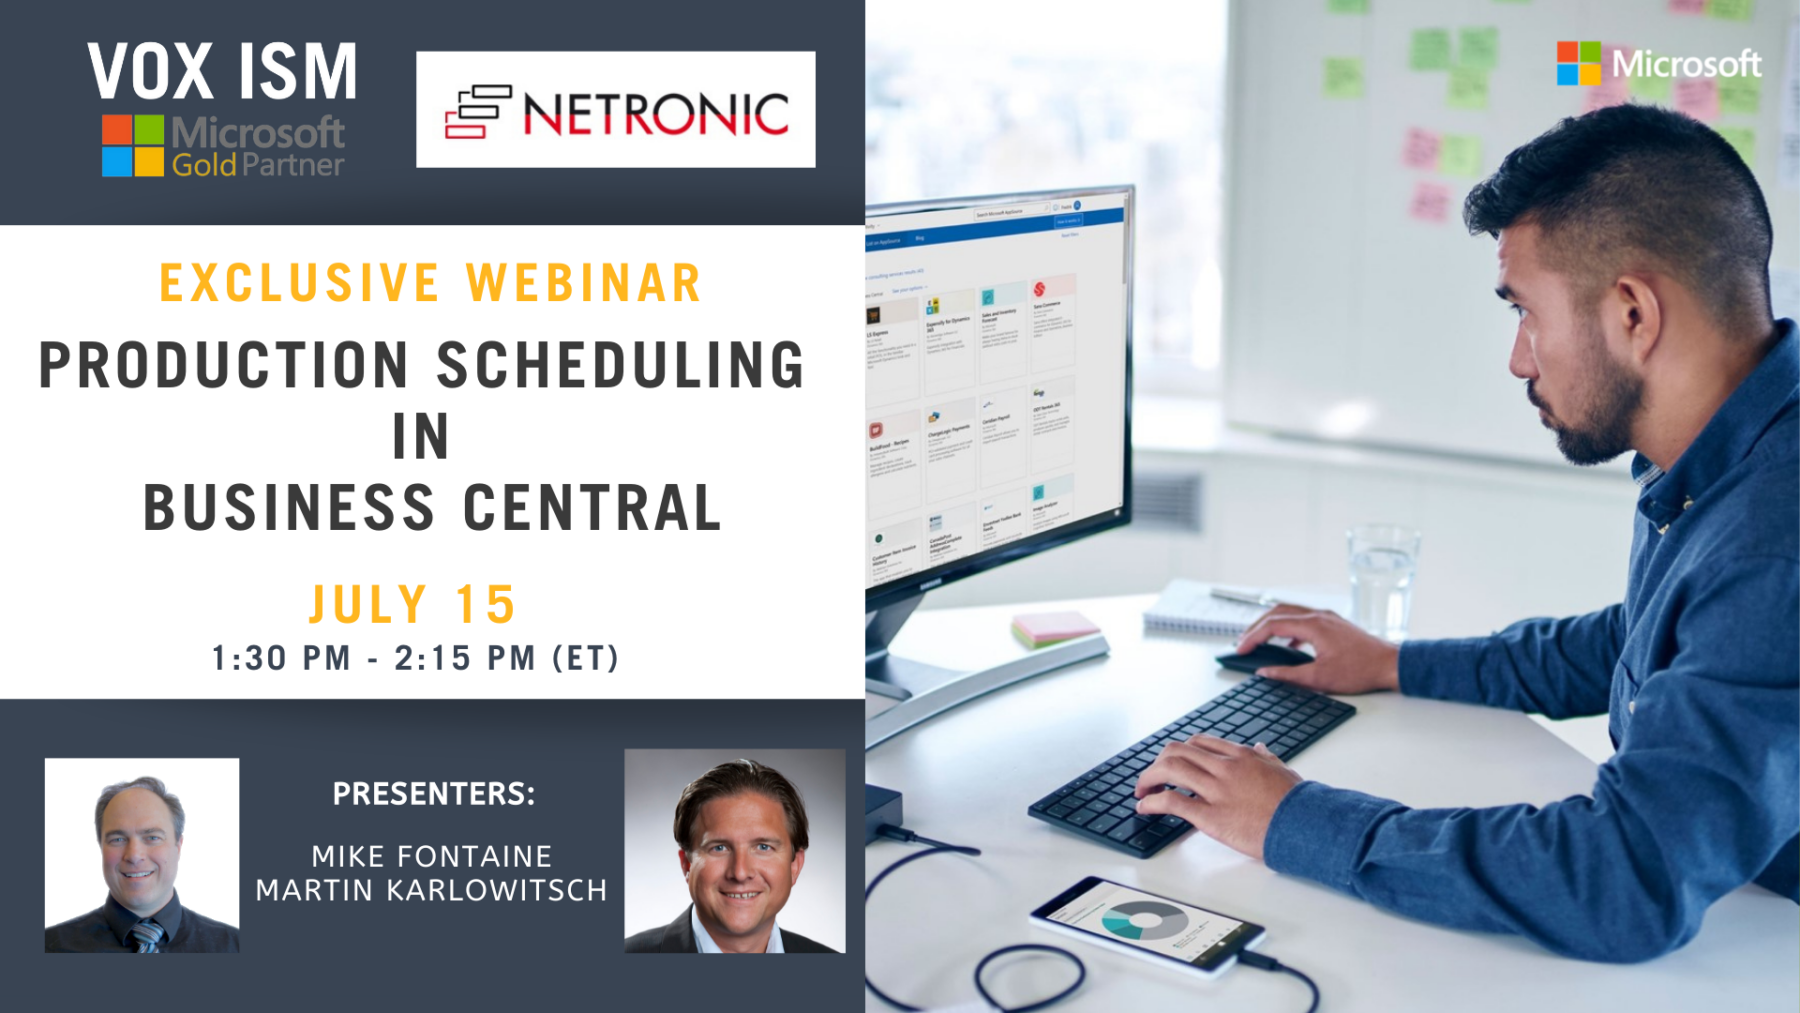 Production Scheduling in Business Central - Netronic x VOX ISM - July 15 - Webinar